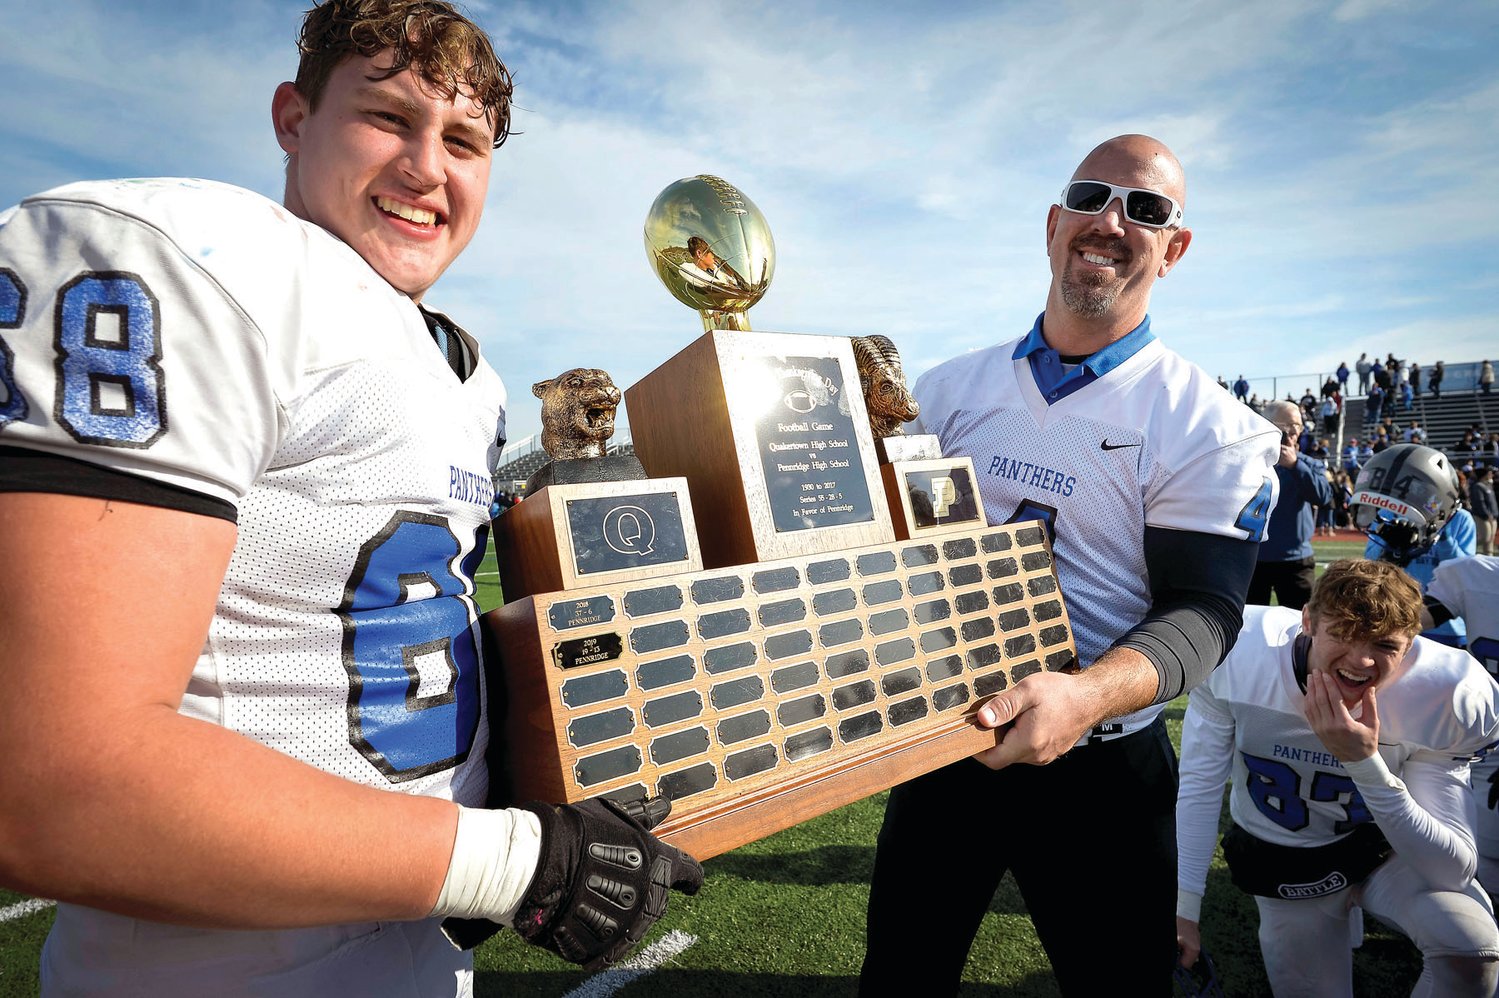 Quakertown’s Blake Griesemer and coach George Banas are all smiles with the trophy.